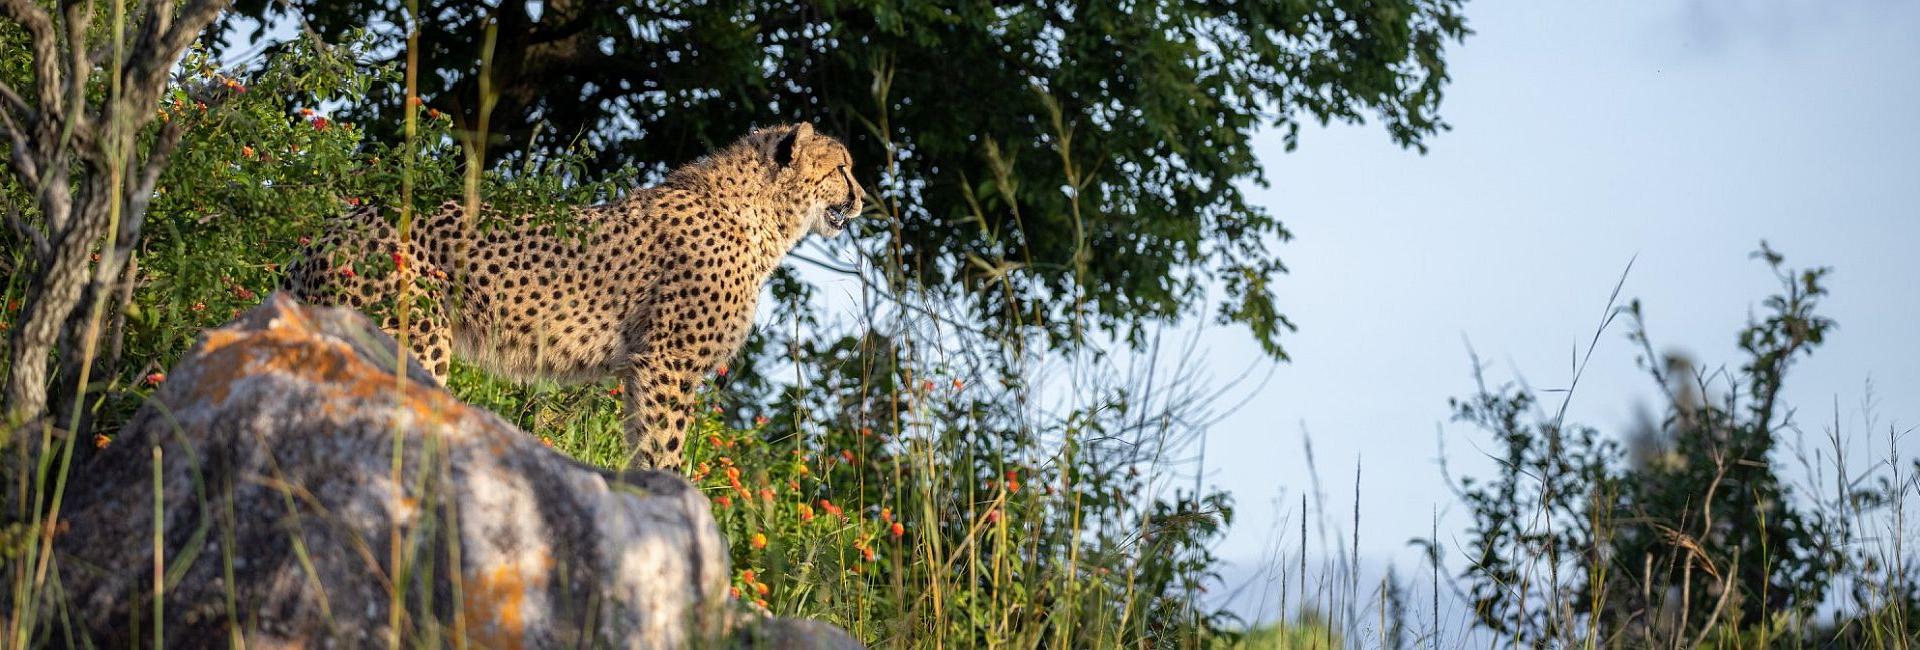 Two Rewilded Cheetahs, Two Years On - A Remarkable Rewilding Story